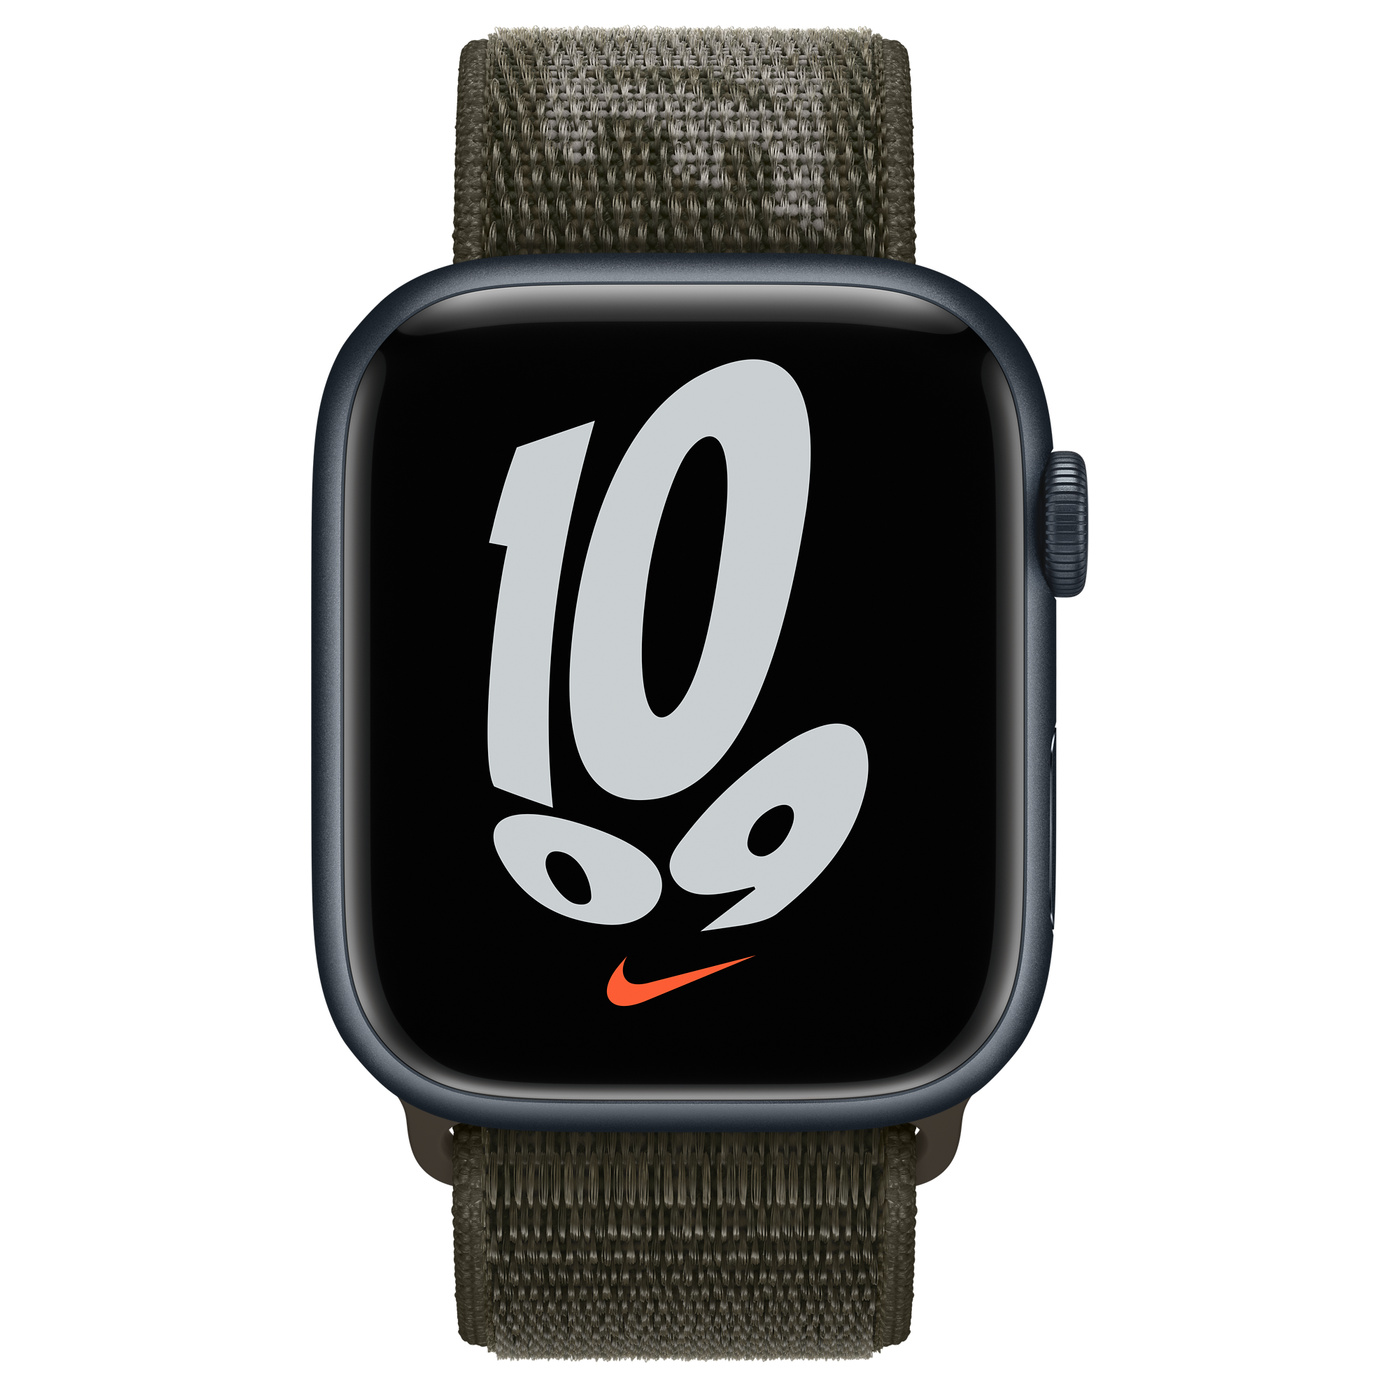 Apple Watch Nike Series 7 (GPS + Cellular) 45mm Midnight Aluminum Case with Nike Sport Loop